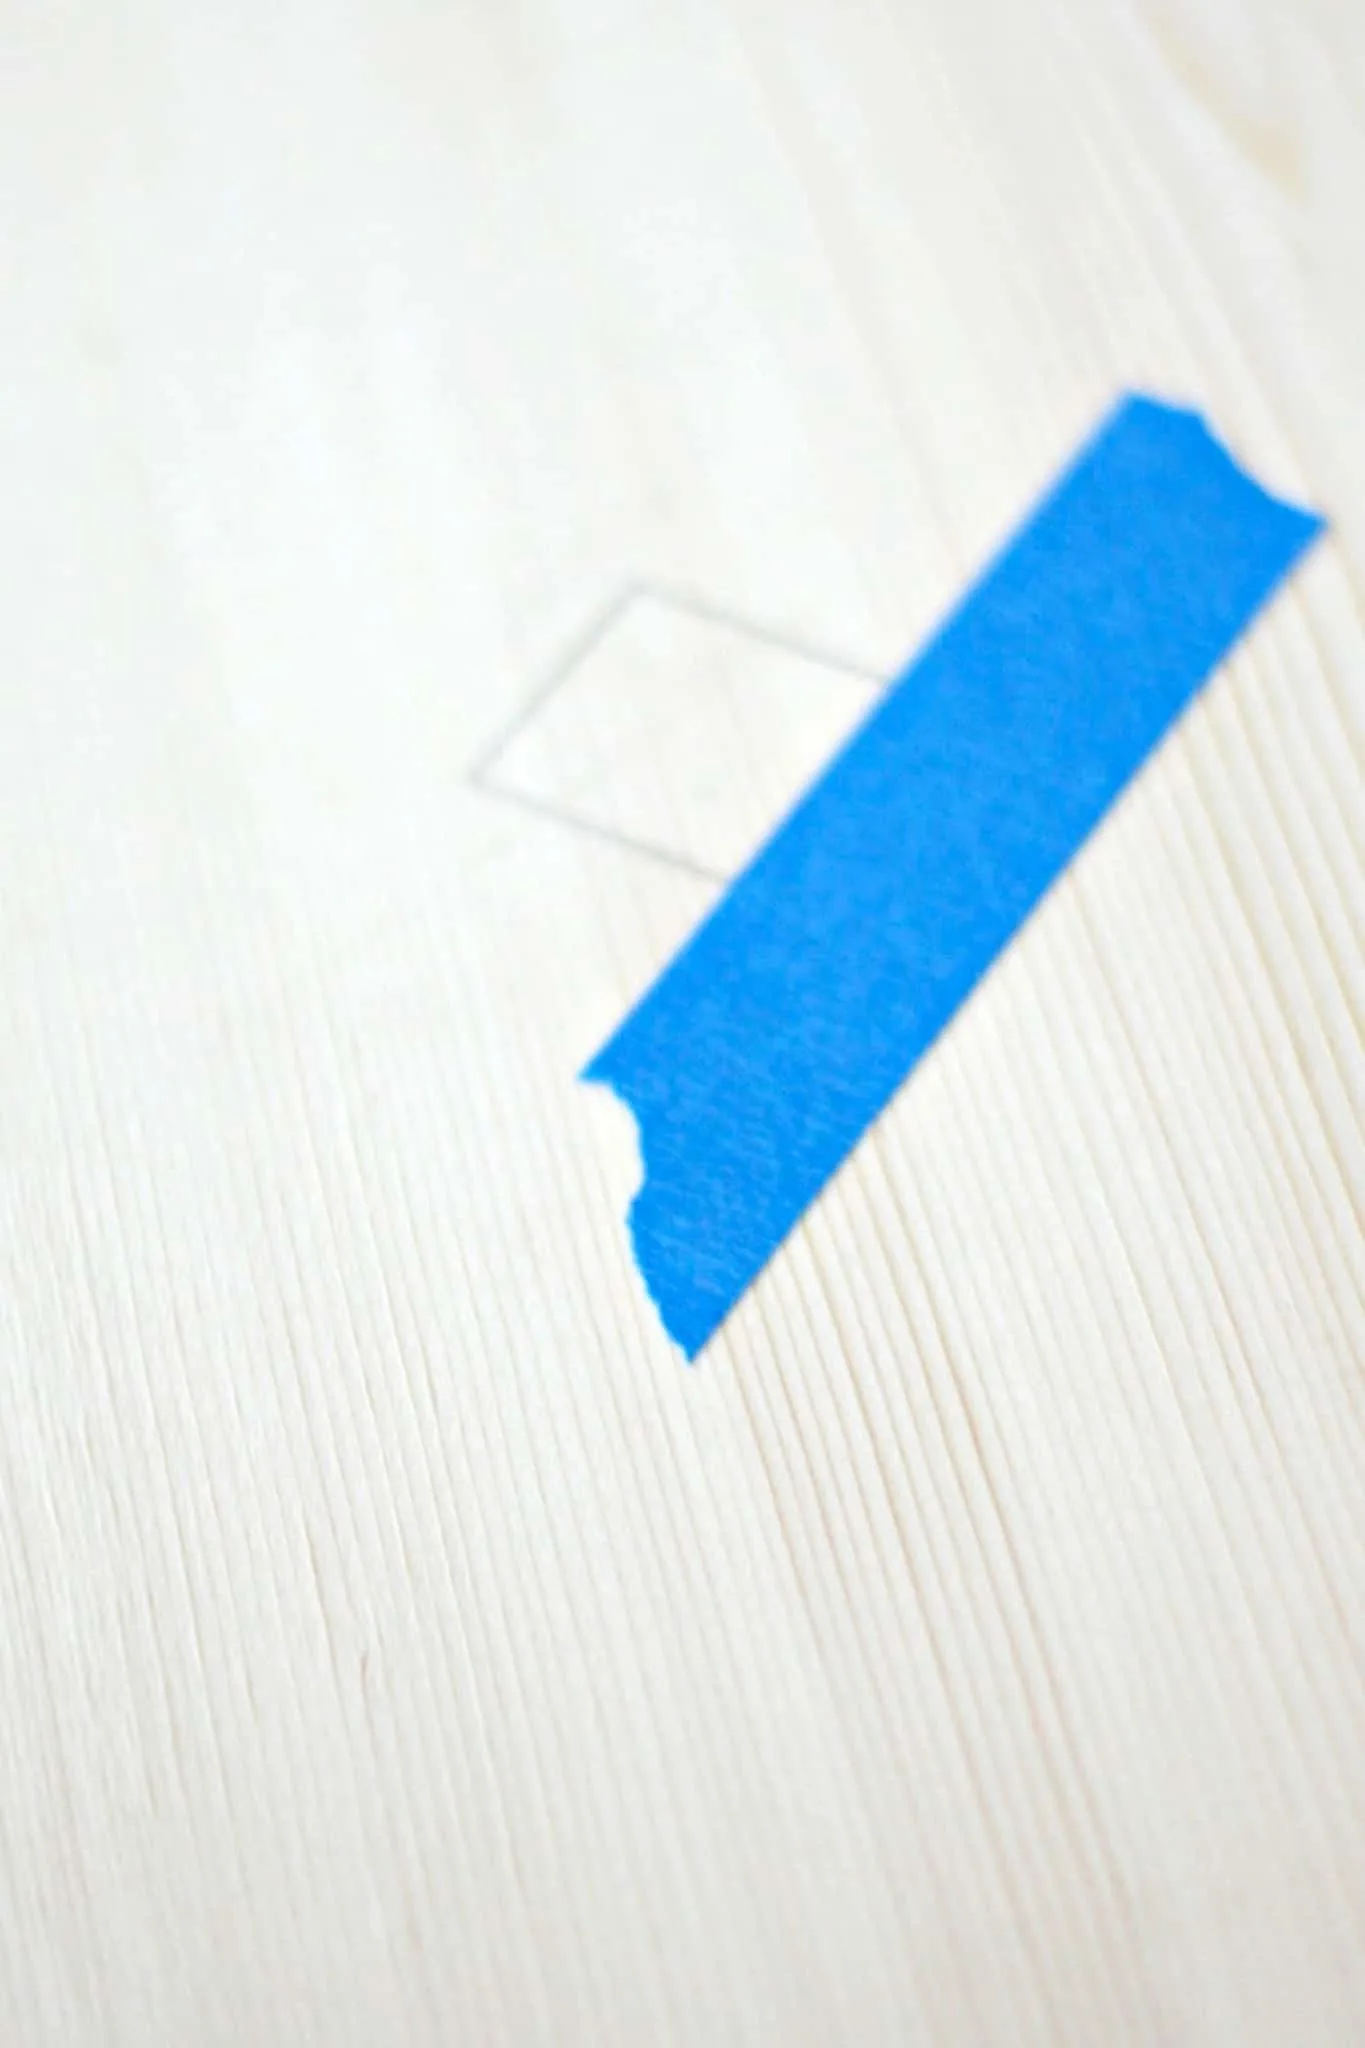 Piece of painter's tape next to a square drawn in pencil on a wood board